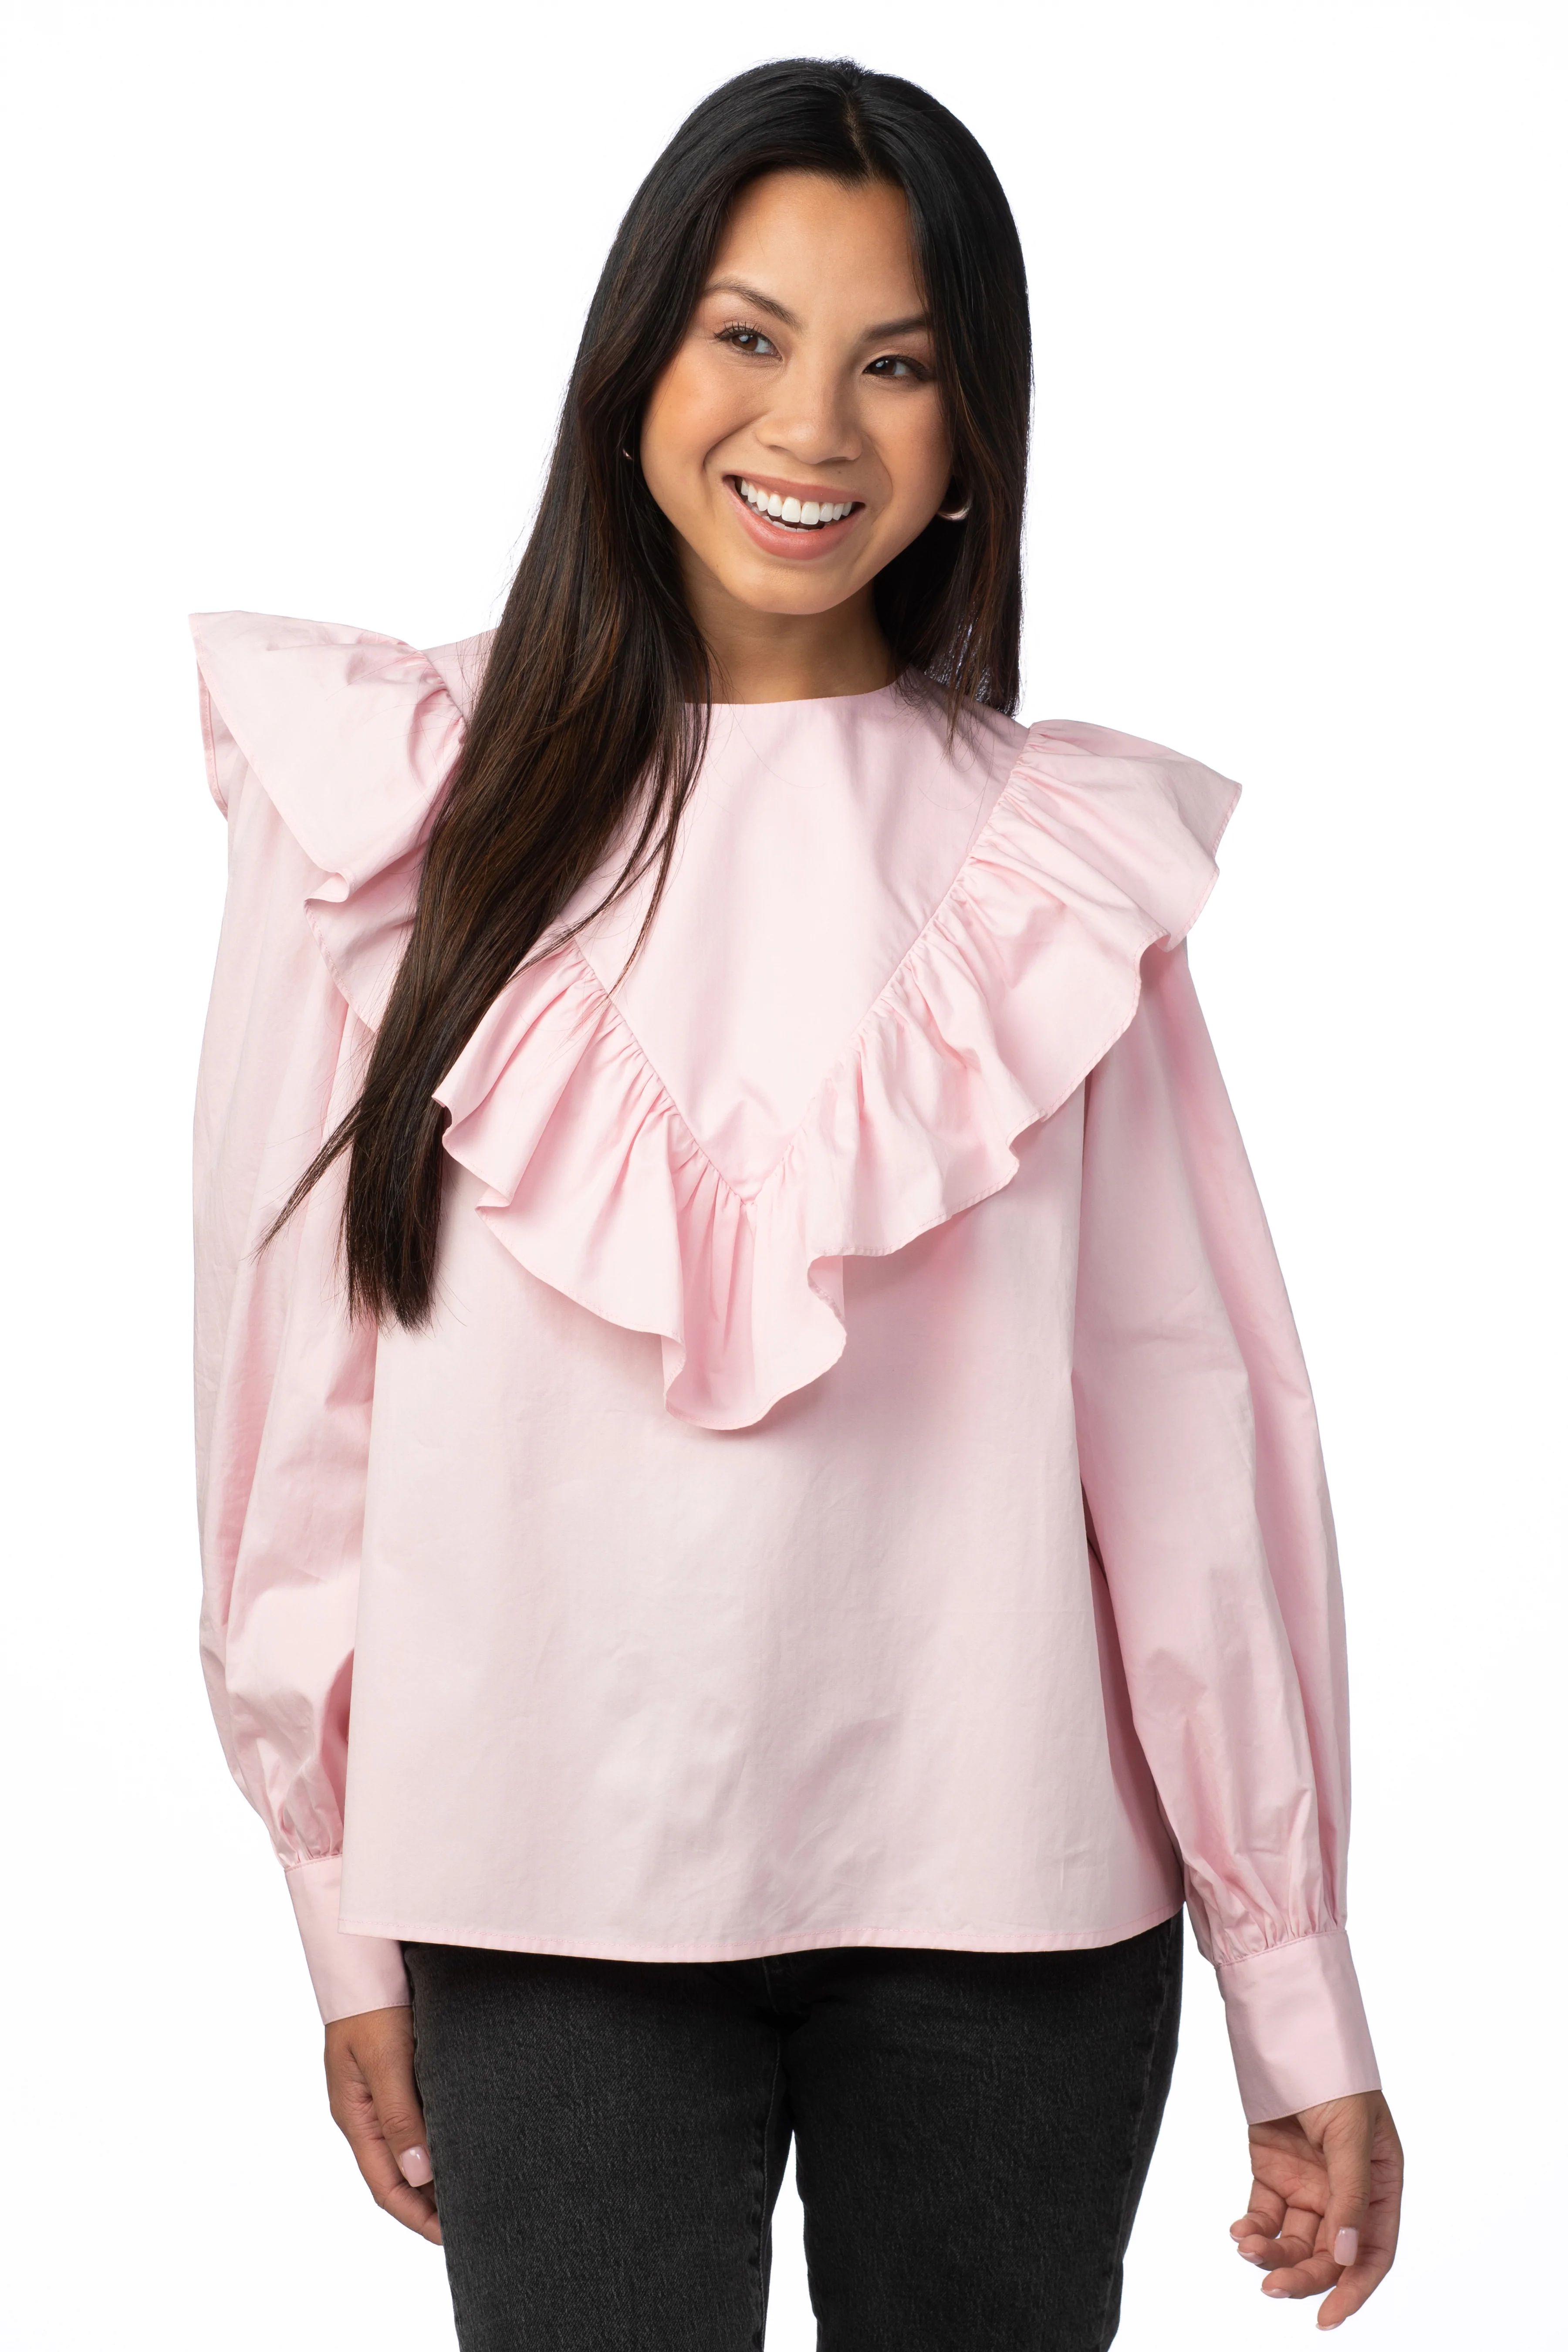 Flint Top in Blossom Pink - CROSBY by Mollie Burch | CROSBY by Mollie Burch